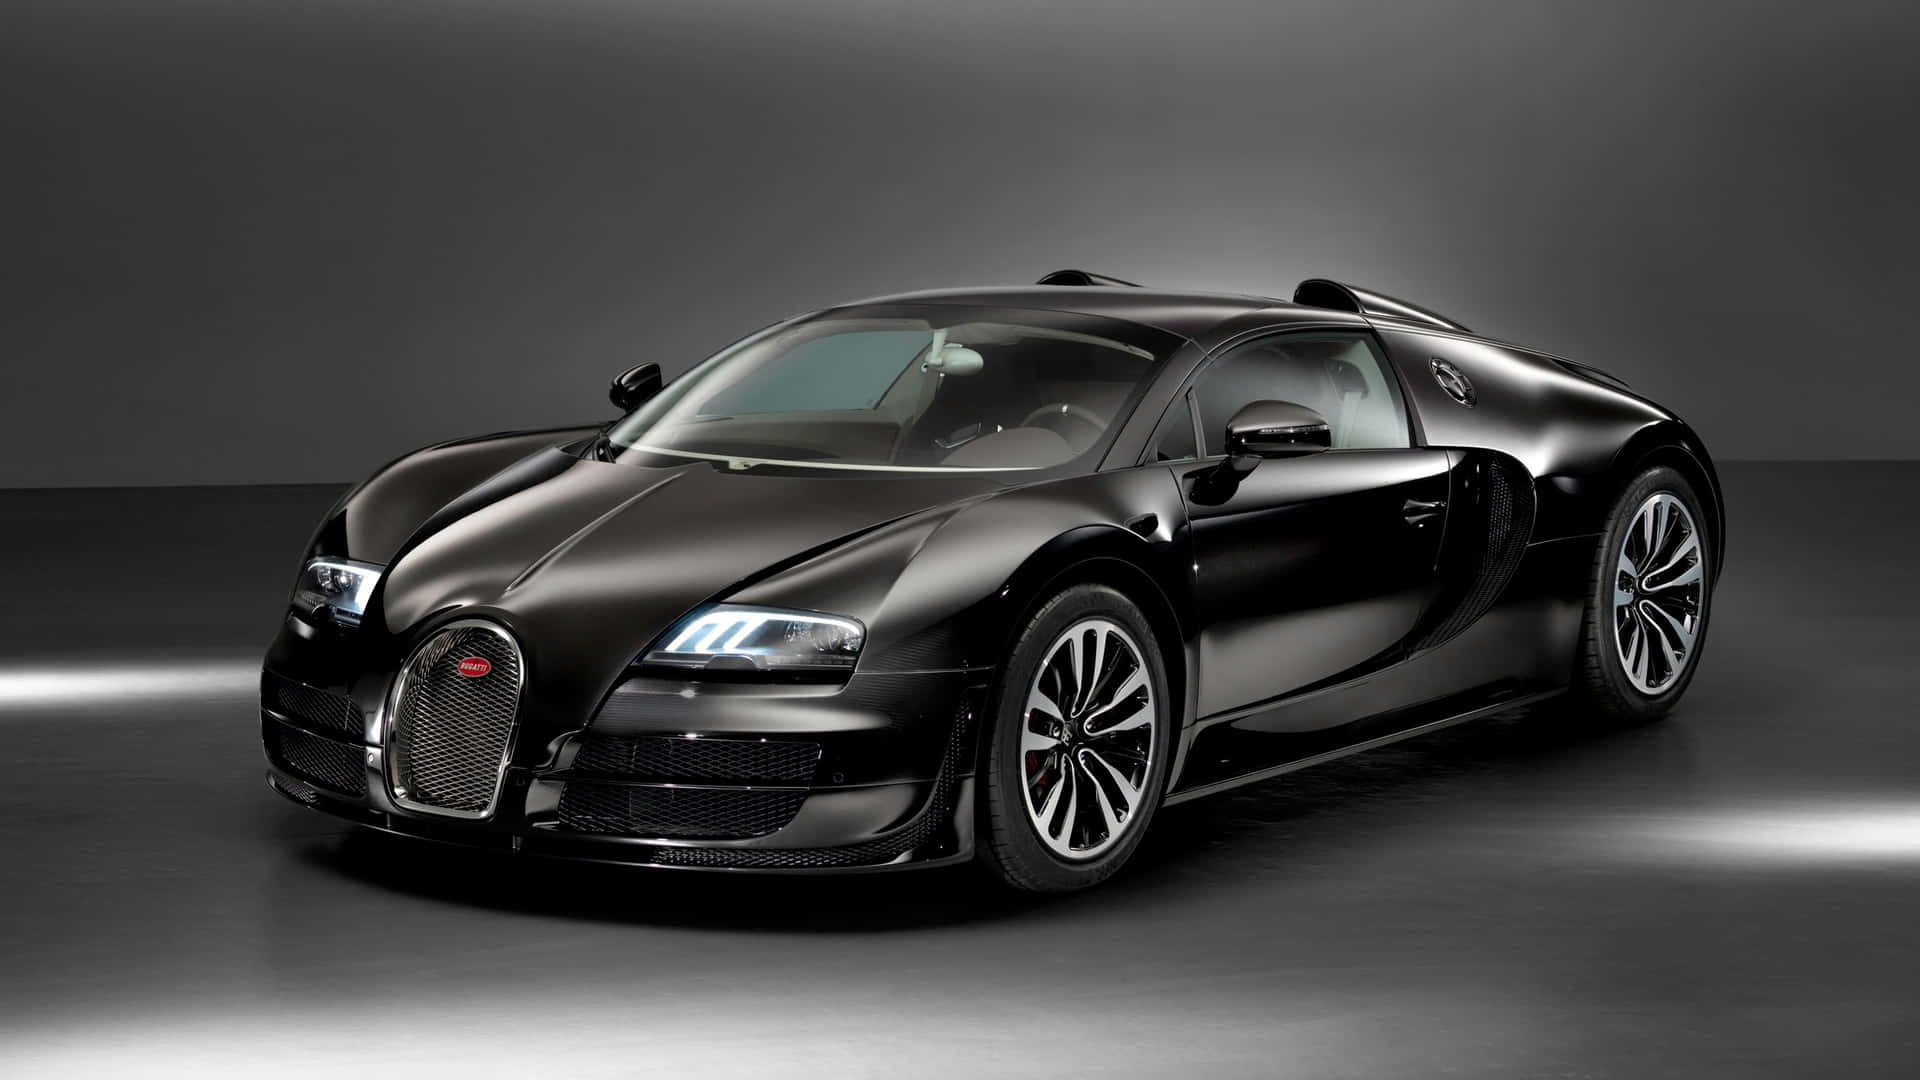 Bugatti Veyron effortlessly displaying speed, luxury, and class. Wallpaper